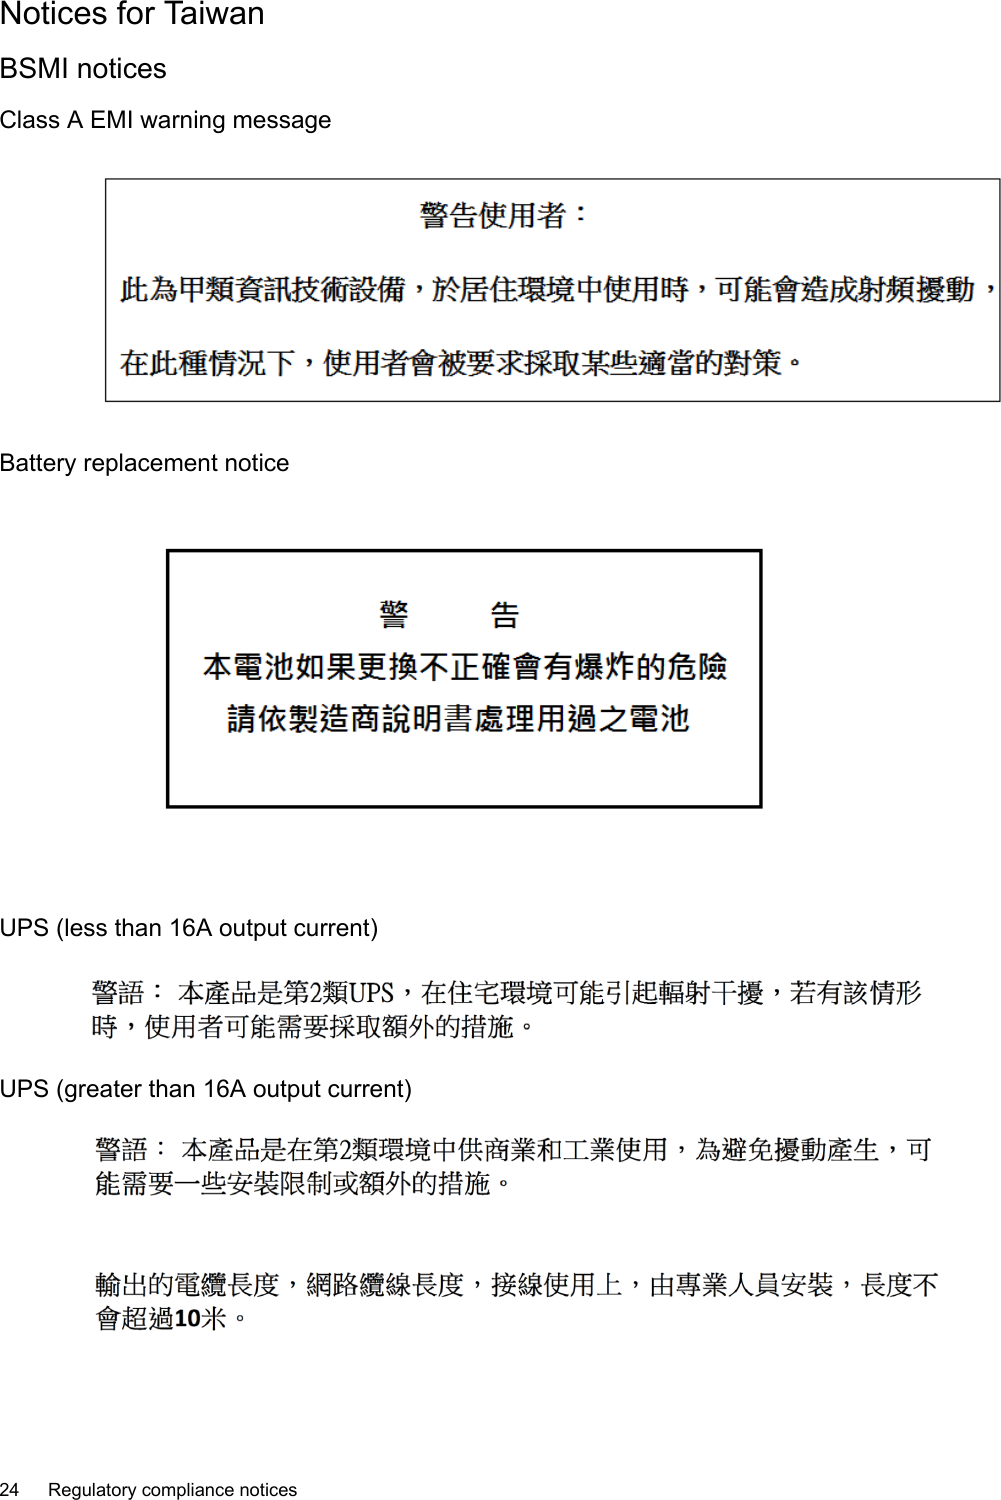 Notices for TaiwanBSMI noticesClass A EMI warning messageBattery replacement noticeUPS (less than 16A output current)UPS (greater than 16A output current)24 Regulatory compliance notices